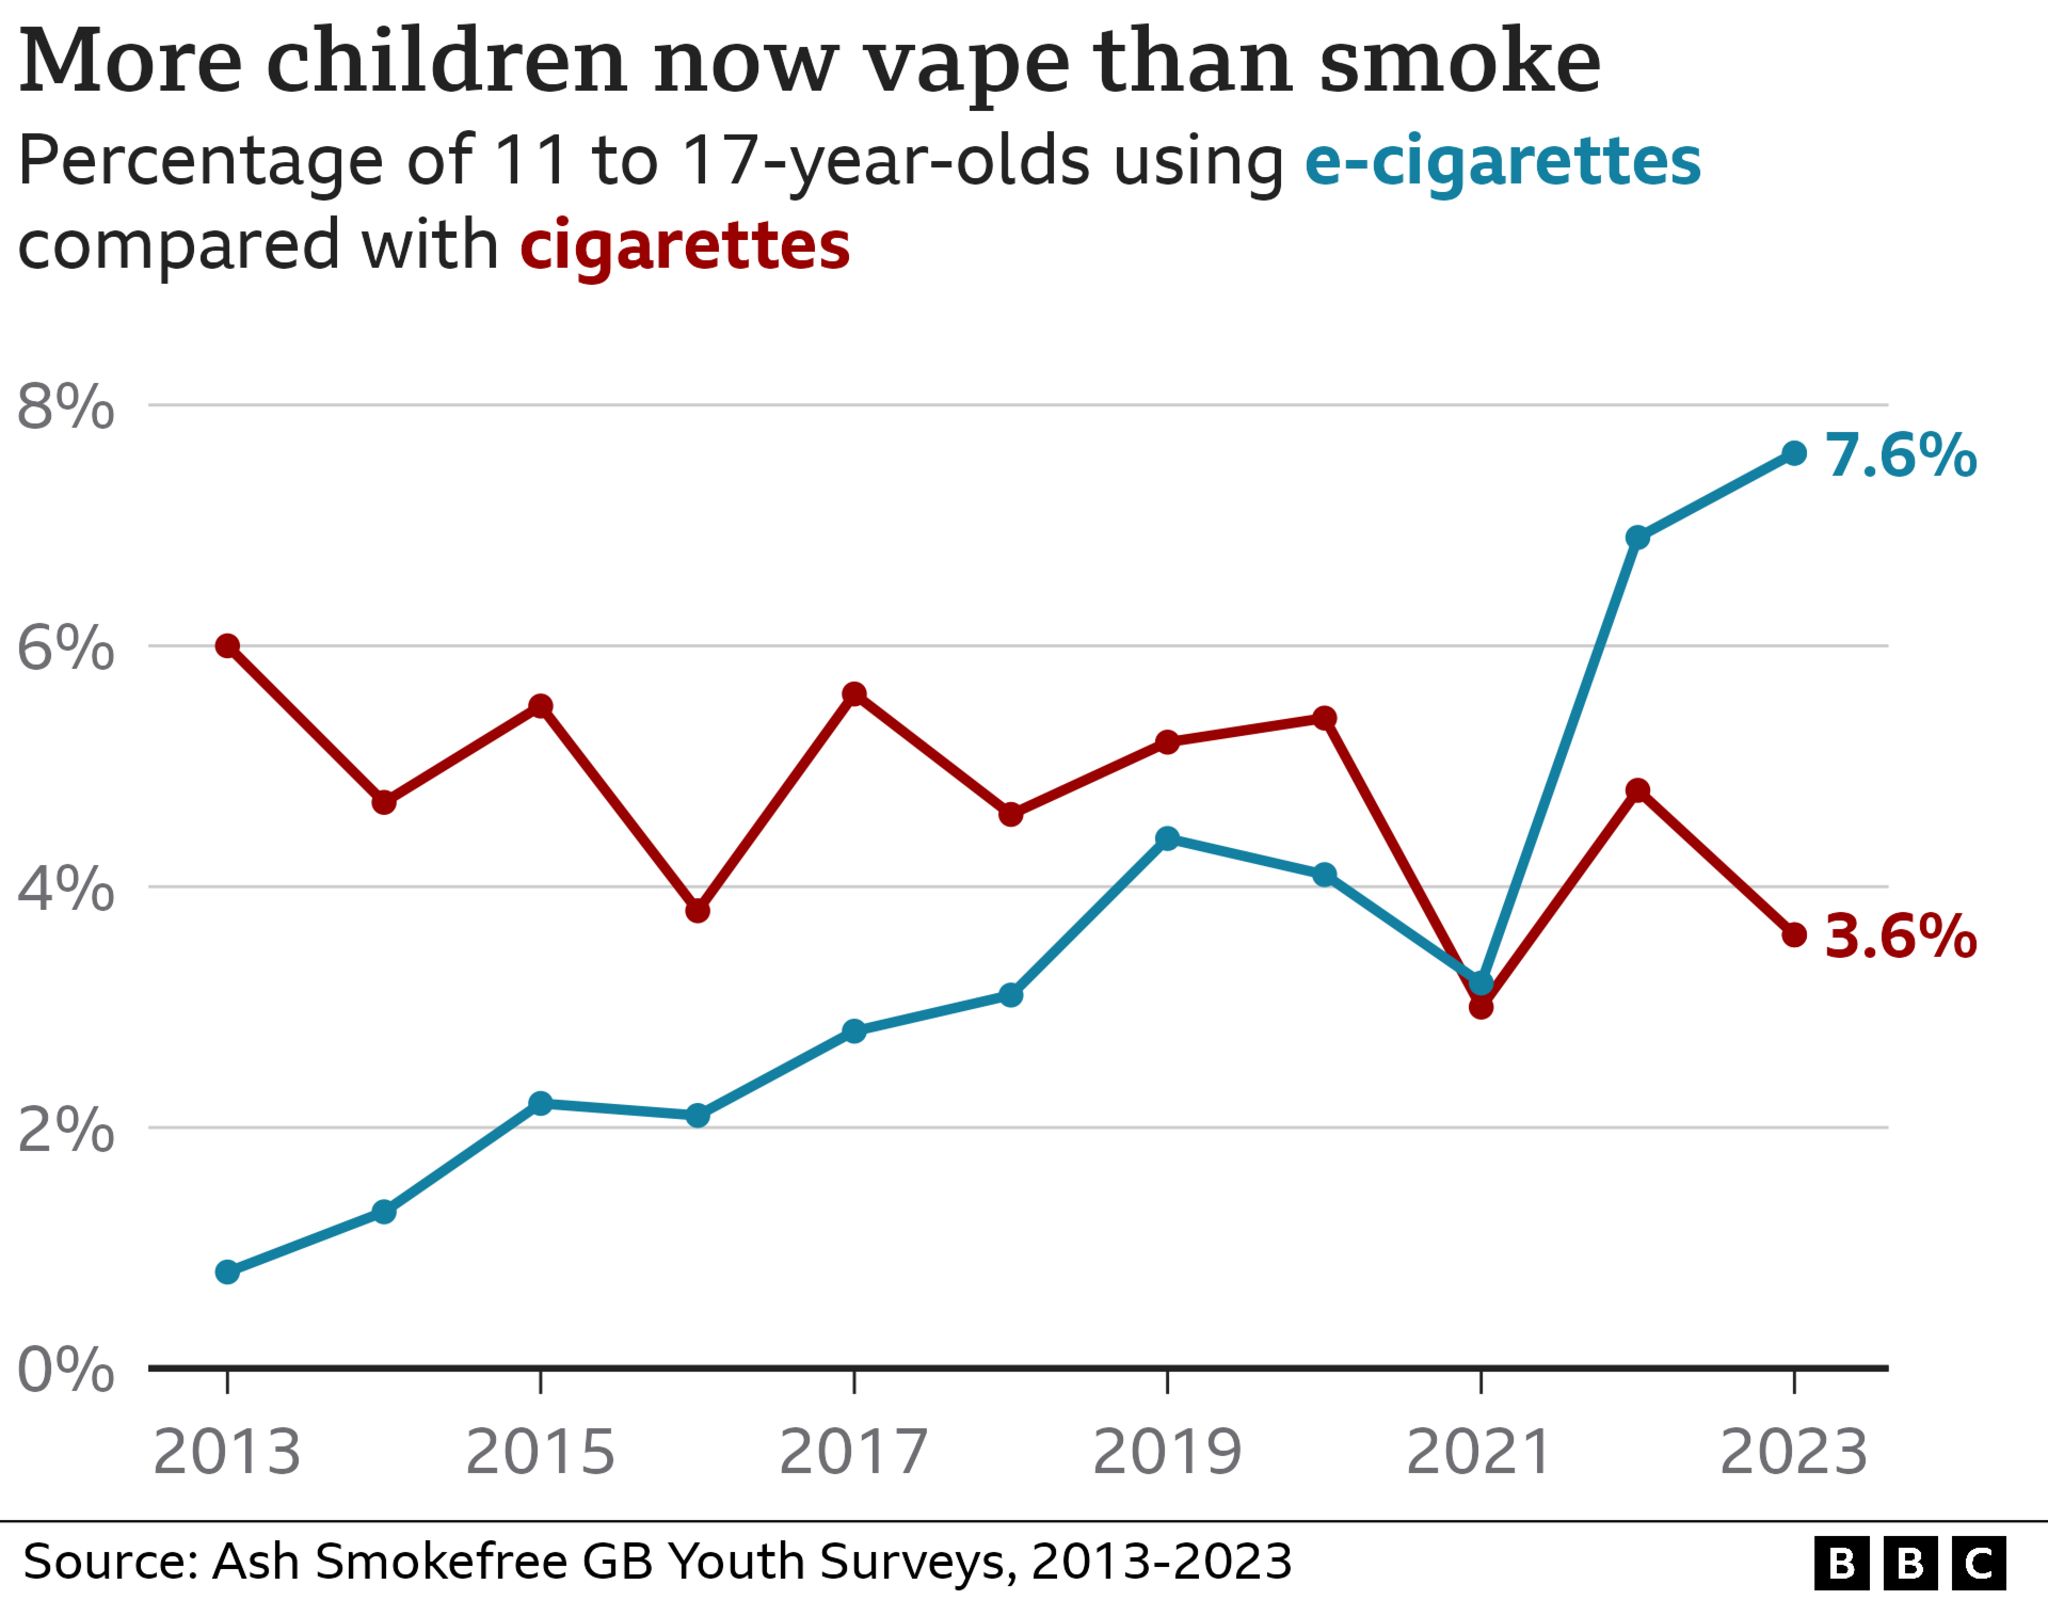 Chart showing that vaping overtook smoking among 11 to 17-year olds in 2021 with 7.6% vaping in 2023 compared with 3.6% smoking, according to ASH